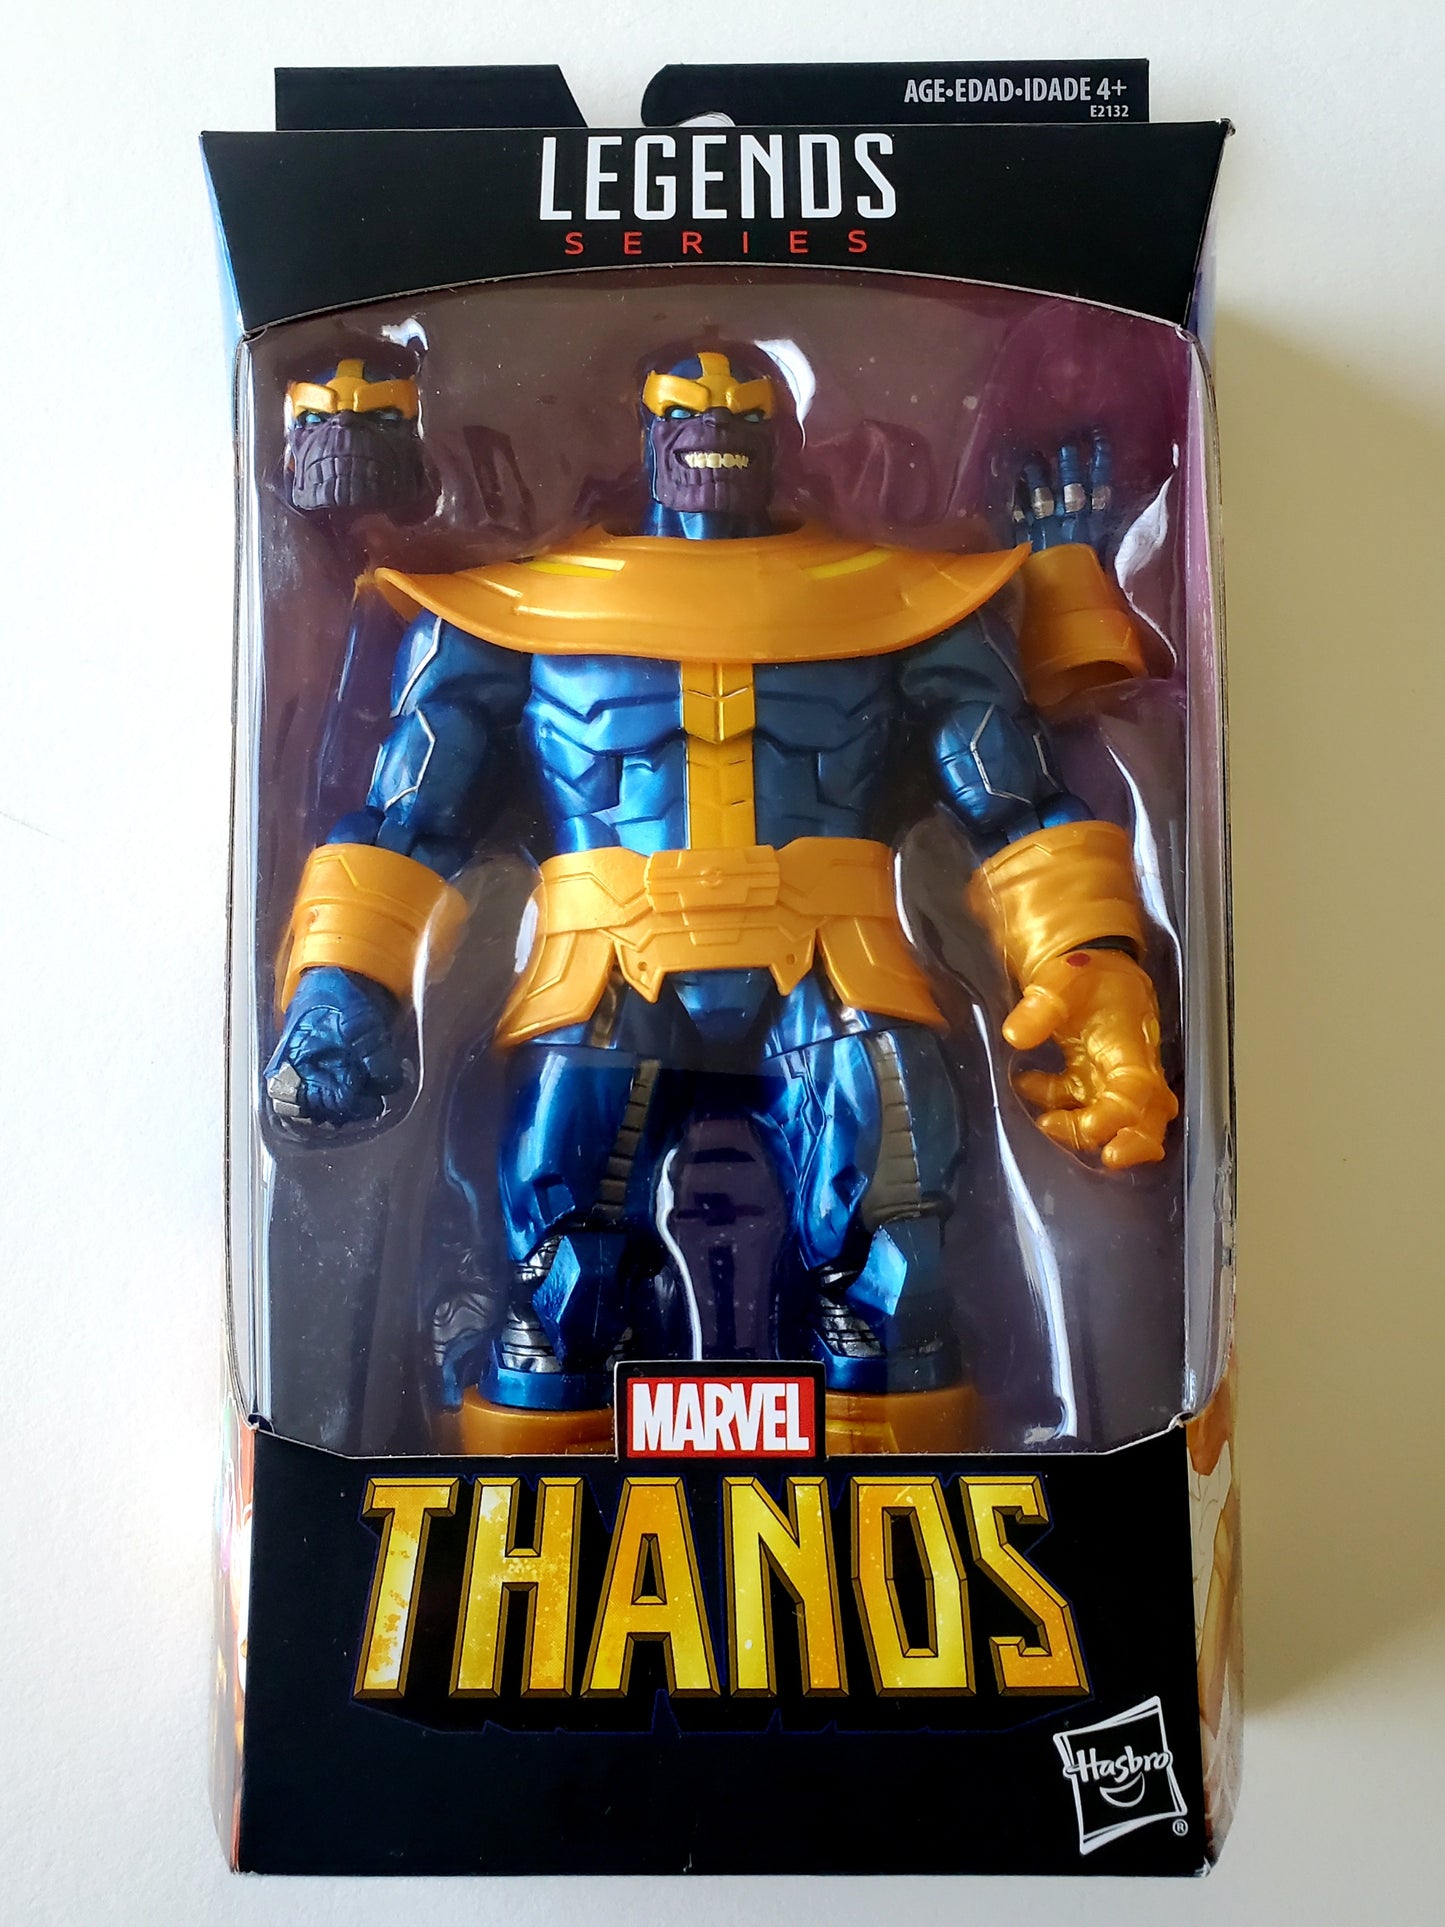 Marvel Legends Wal-Mart Exclusive Thanos